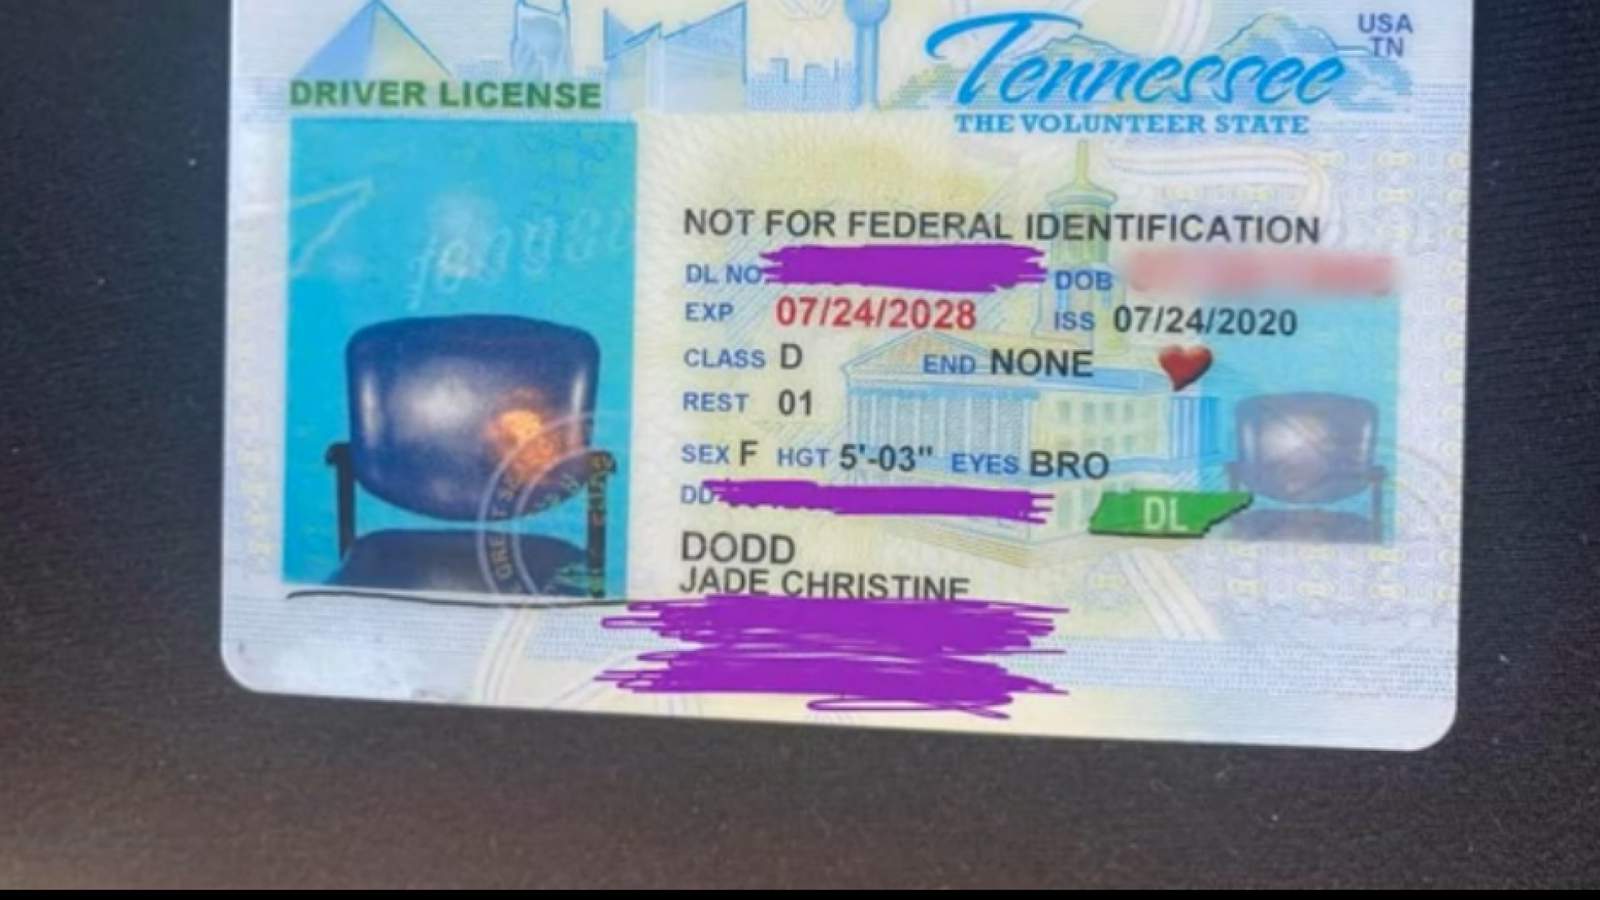 Tennessee woman gets ID with photo of chair on it